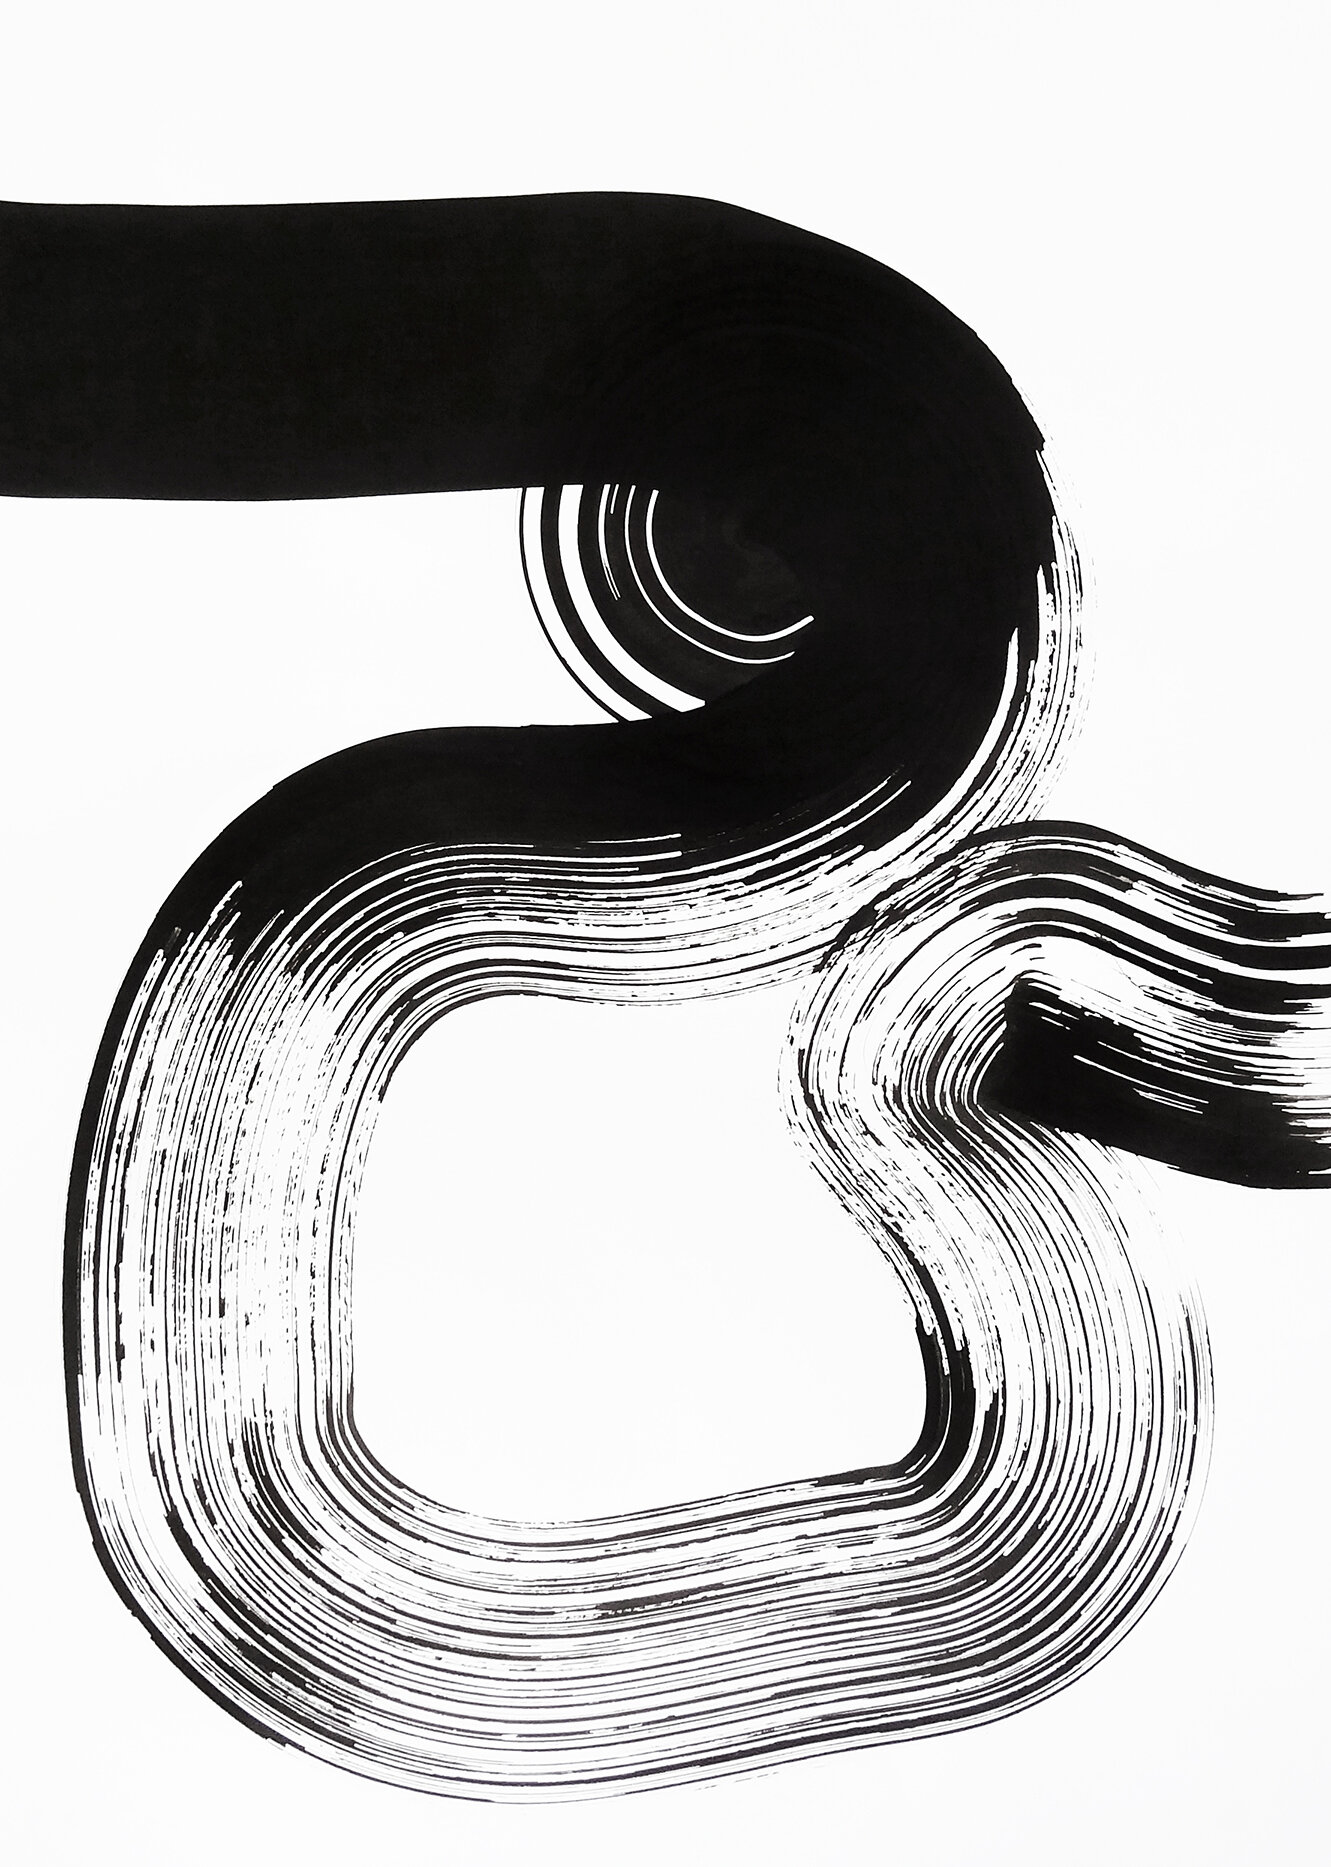  Untitled, 2020 strokes series calligraphy ink on paper 42,0 x 29,7 cm (11-20) 